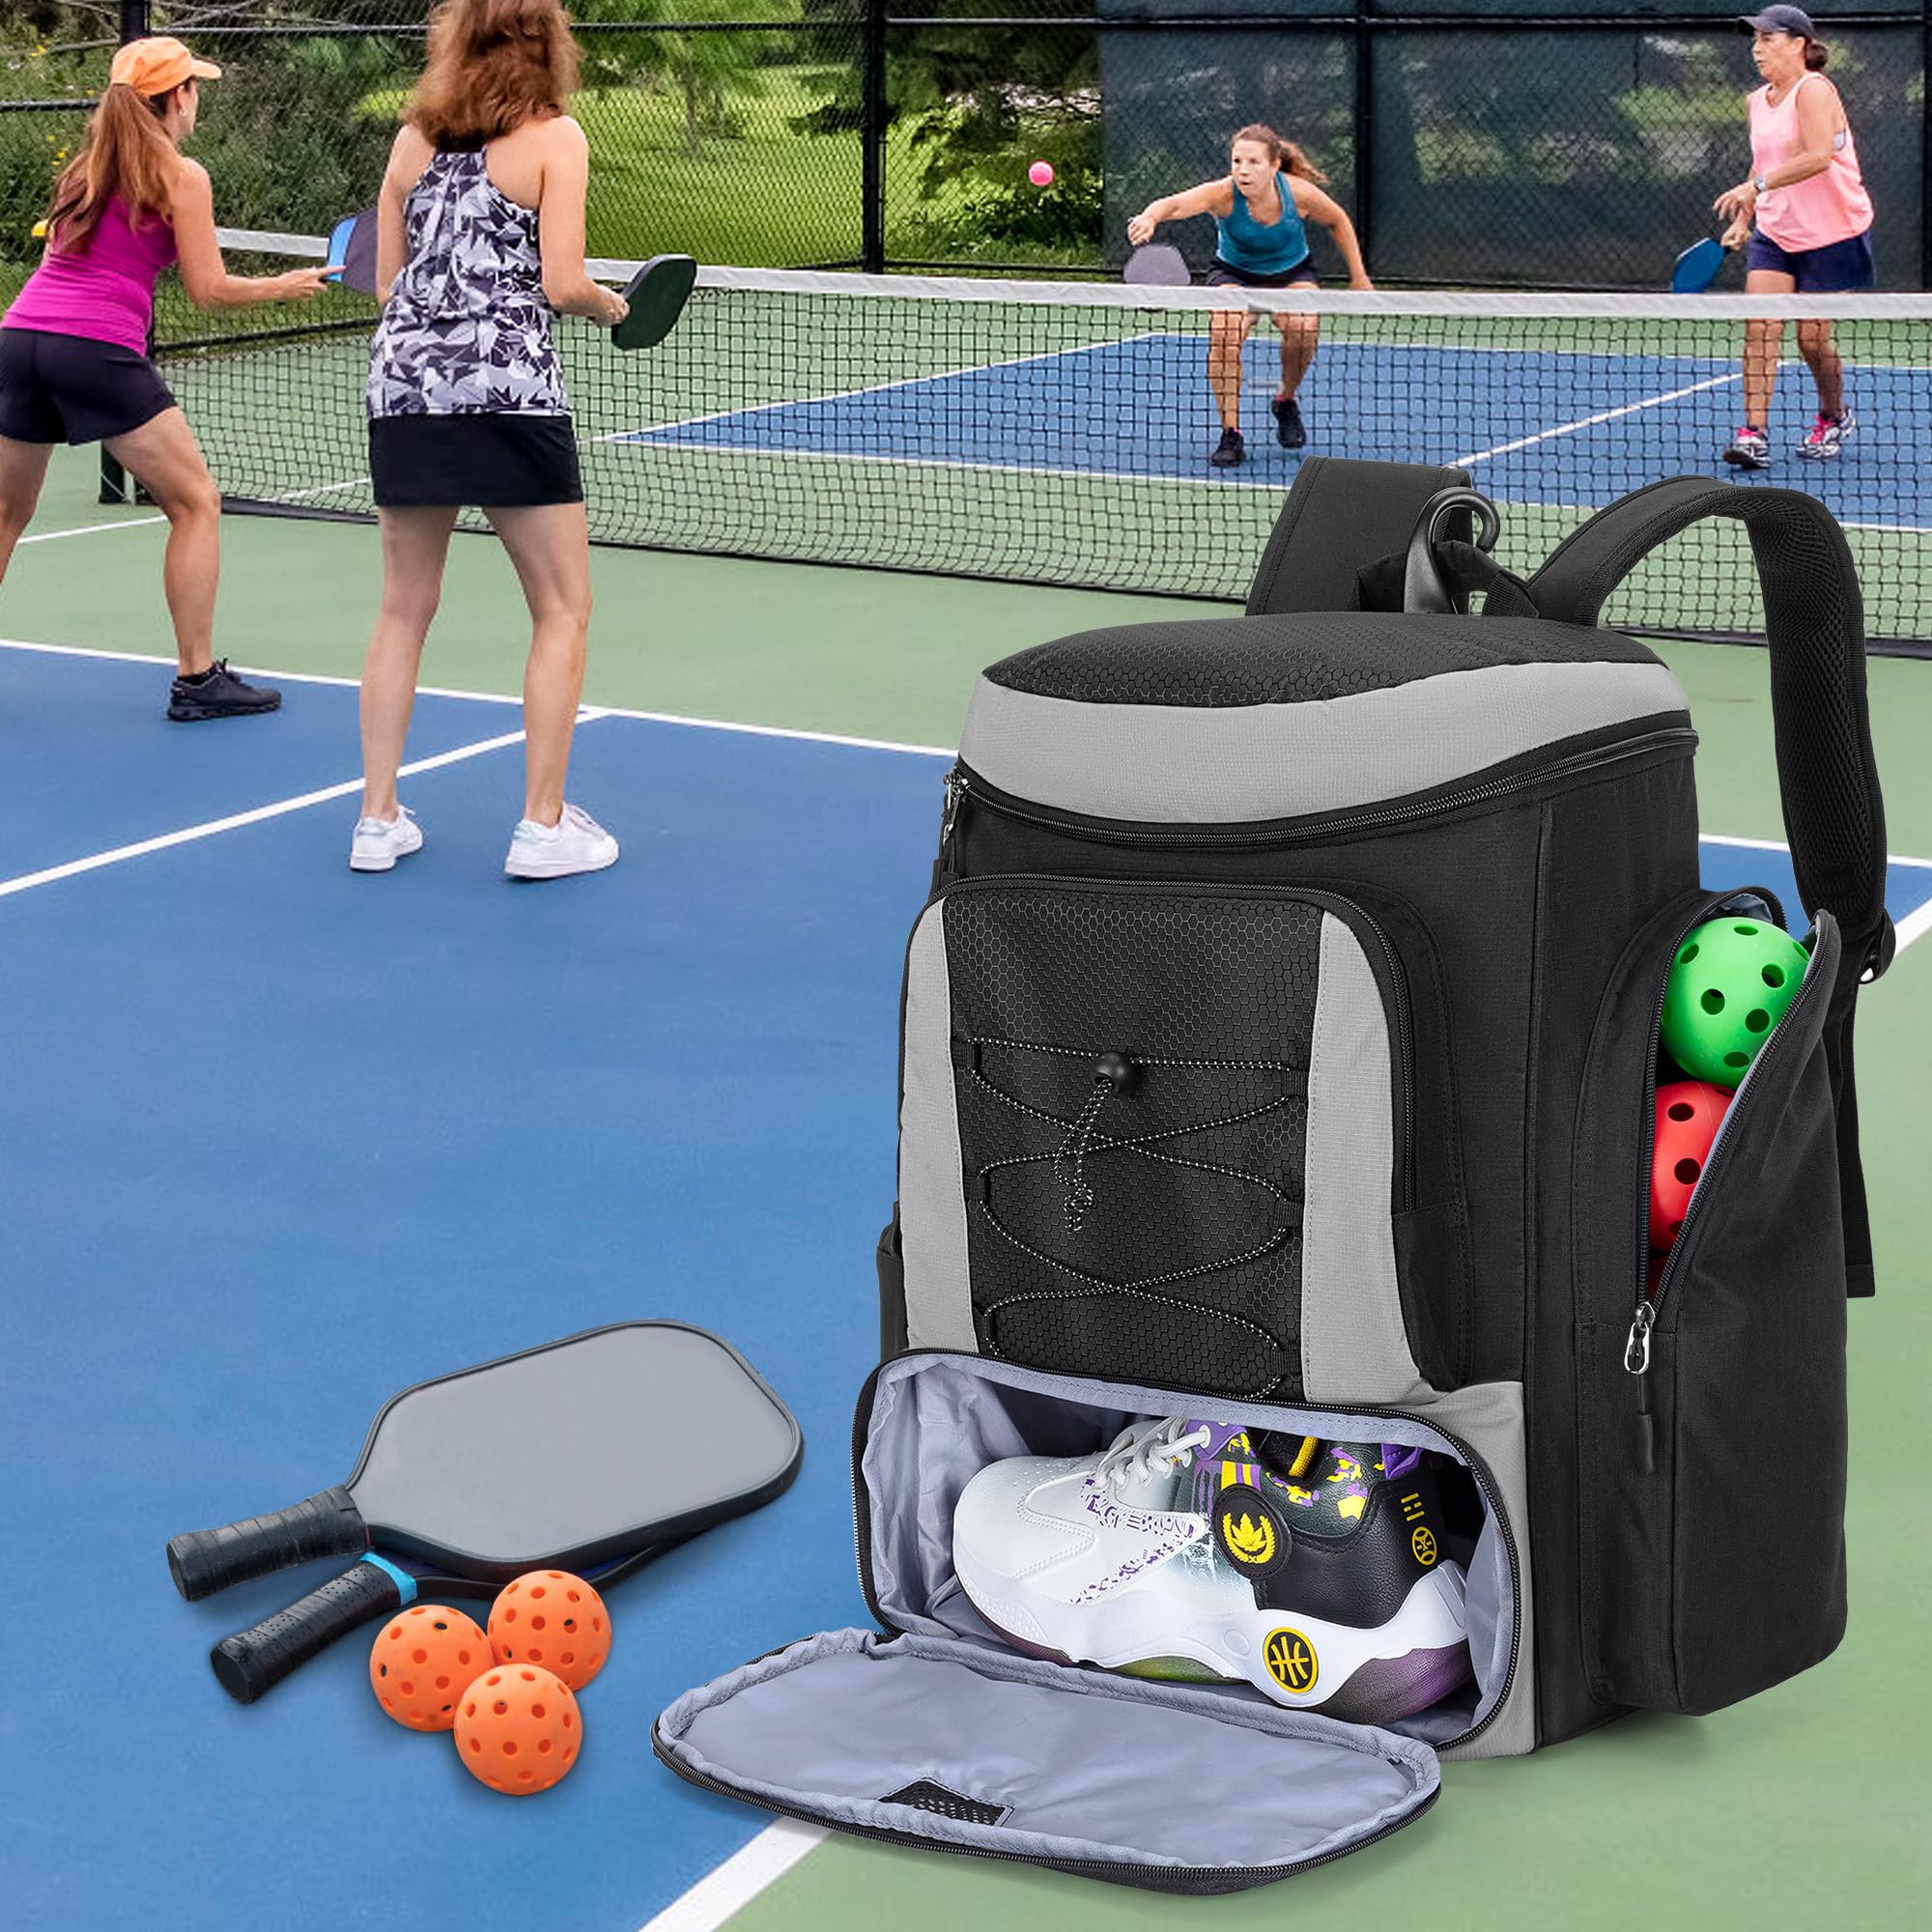 GOBUROS Pickleball Paddle Bag Backpack for 4 Rackets with Fence Hook, Pickleball Equipment Bag with Shoe Compartment for Men Women, Grey, Bag Only